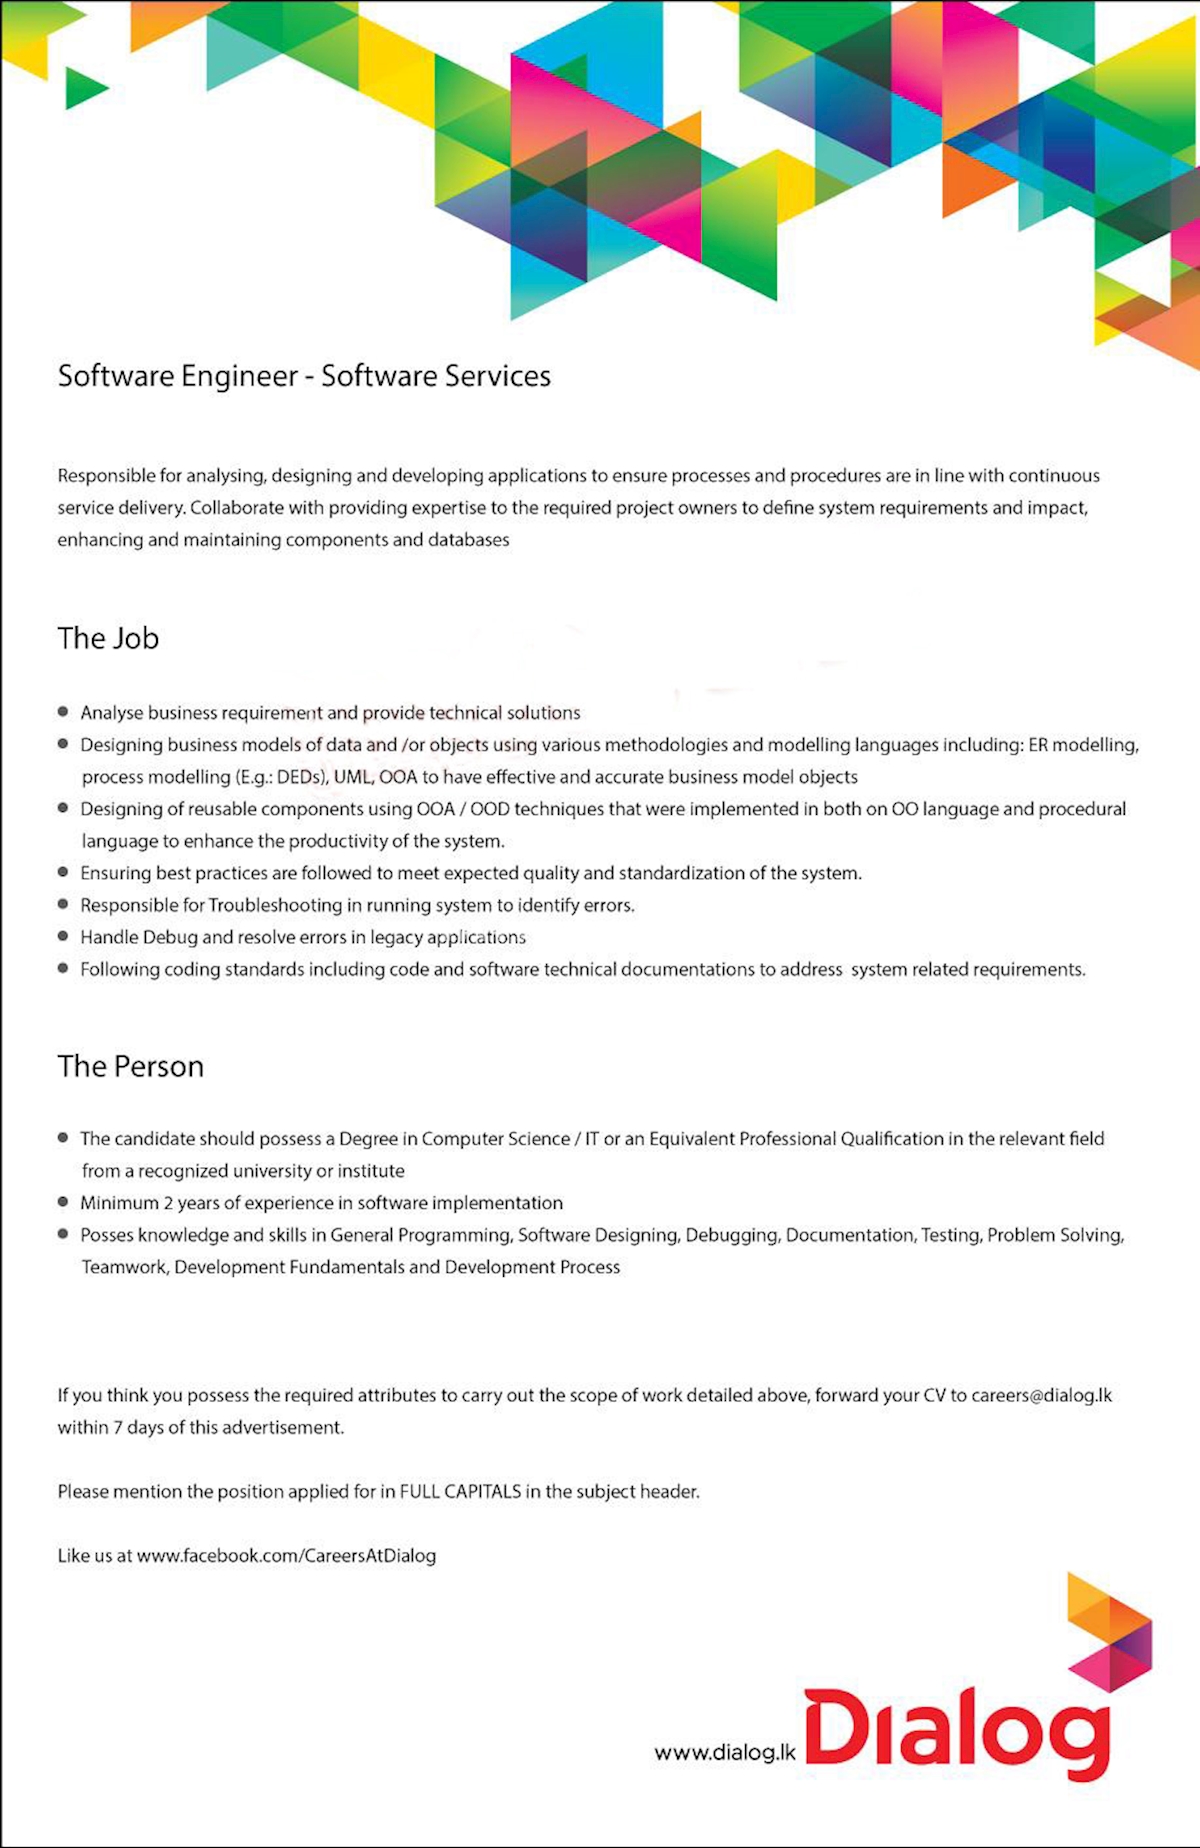 Software Engineer - Software Services